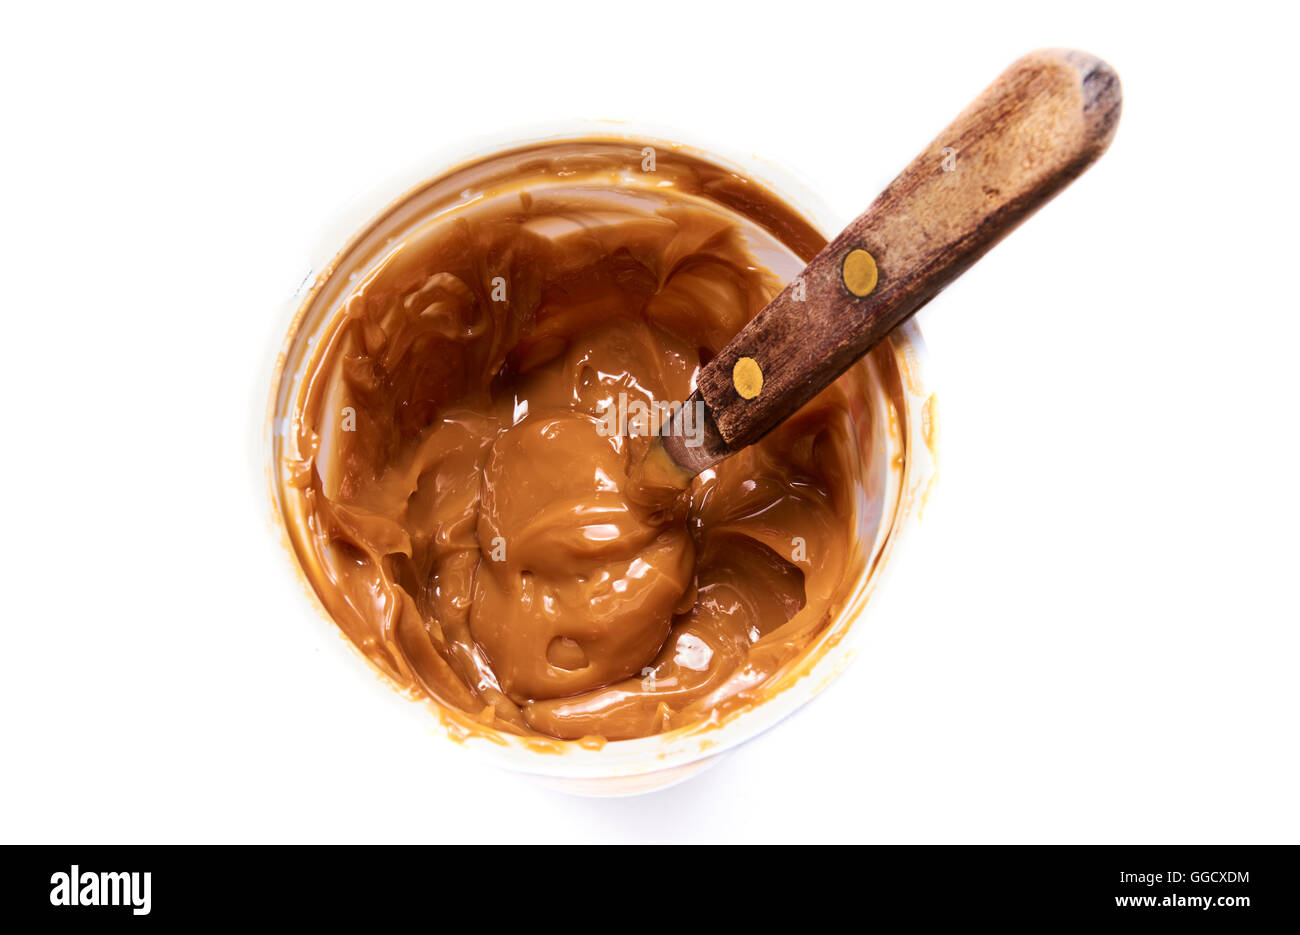 BUENOS AIRES, ARGENTINA – AUGUST 3, 2016:  A jar of Ilolay milk candy with some of it in a spoon. Stock Photo